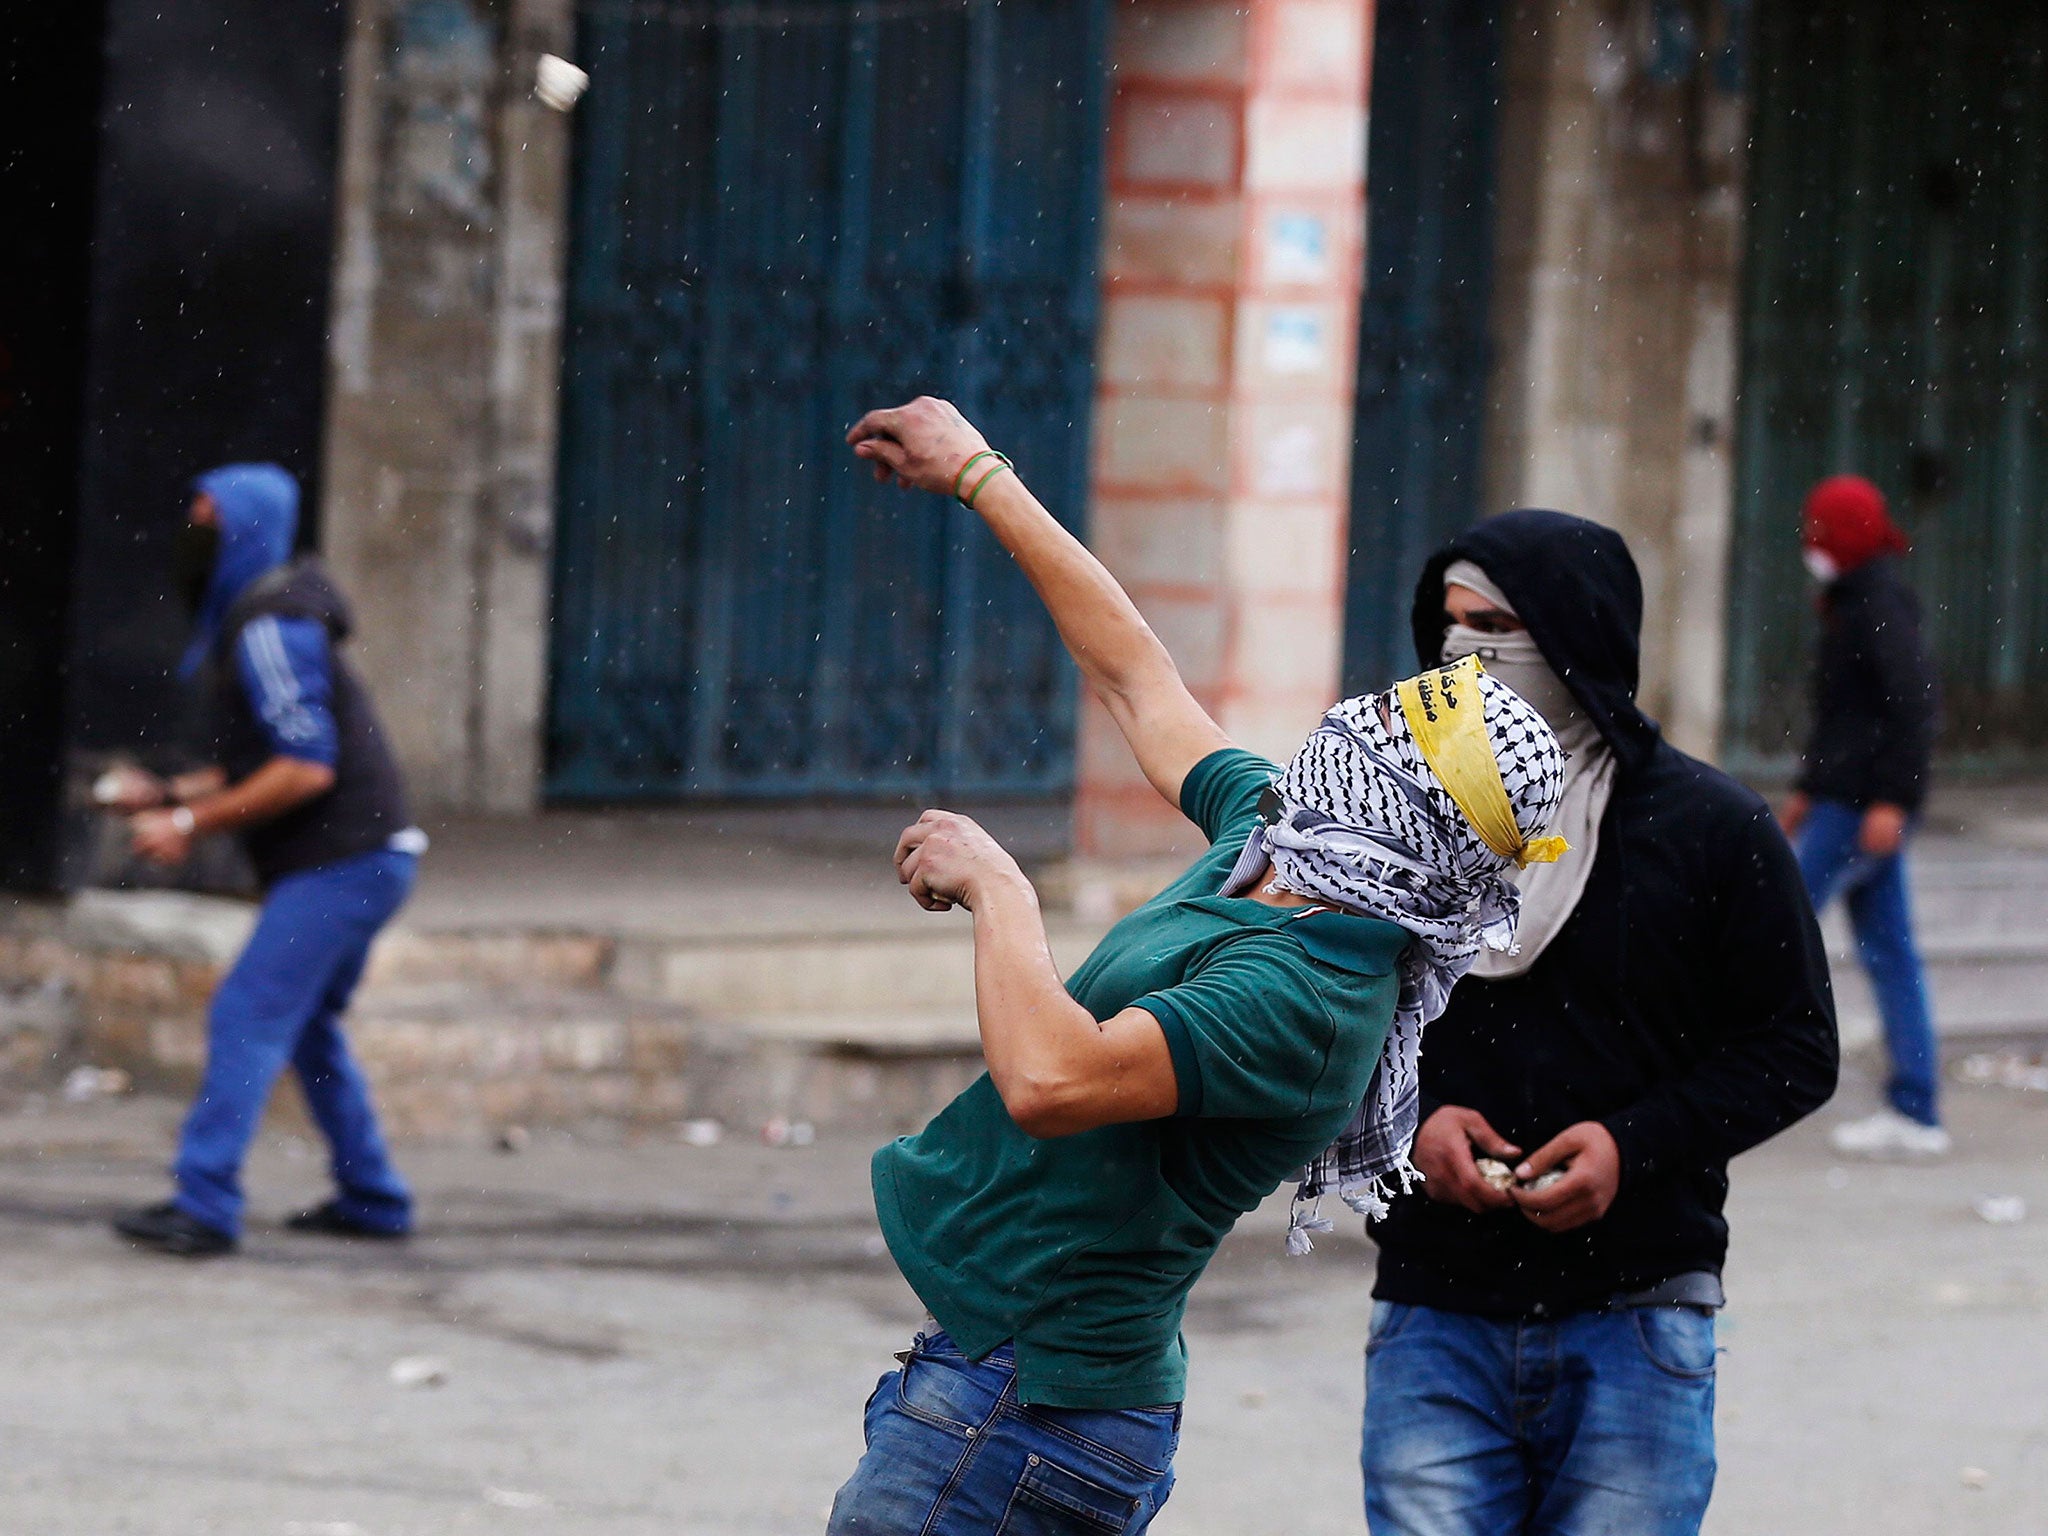 A Palestinian protester throws a stone at Israeli troops during clashes in the West Bank town of Abu Dis near Jerusalem